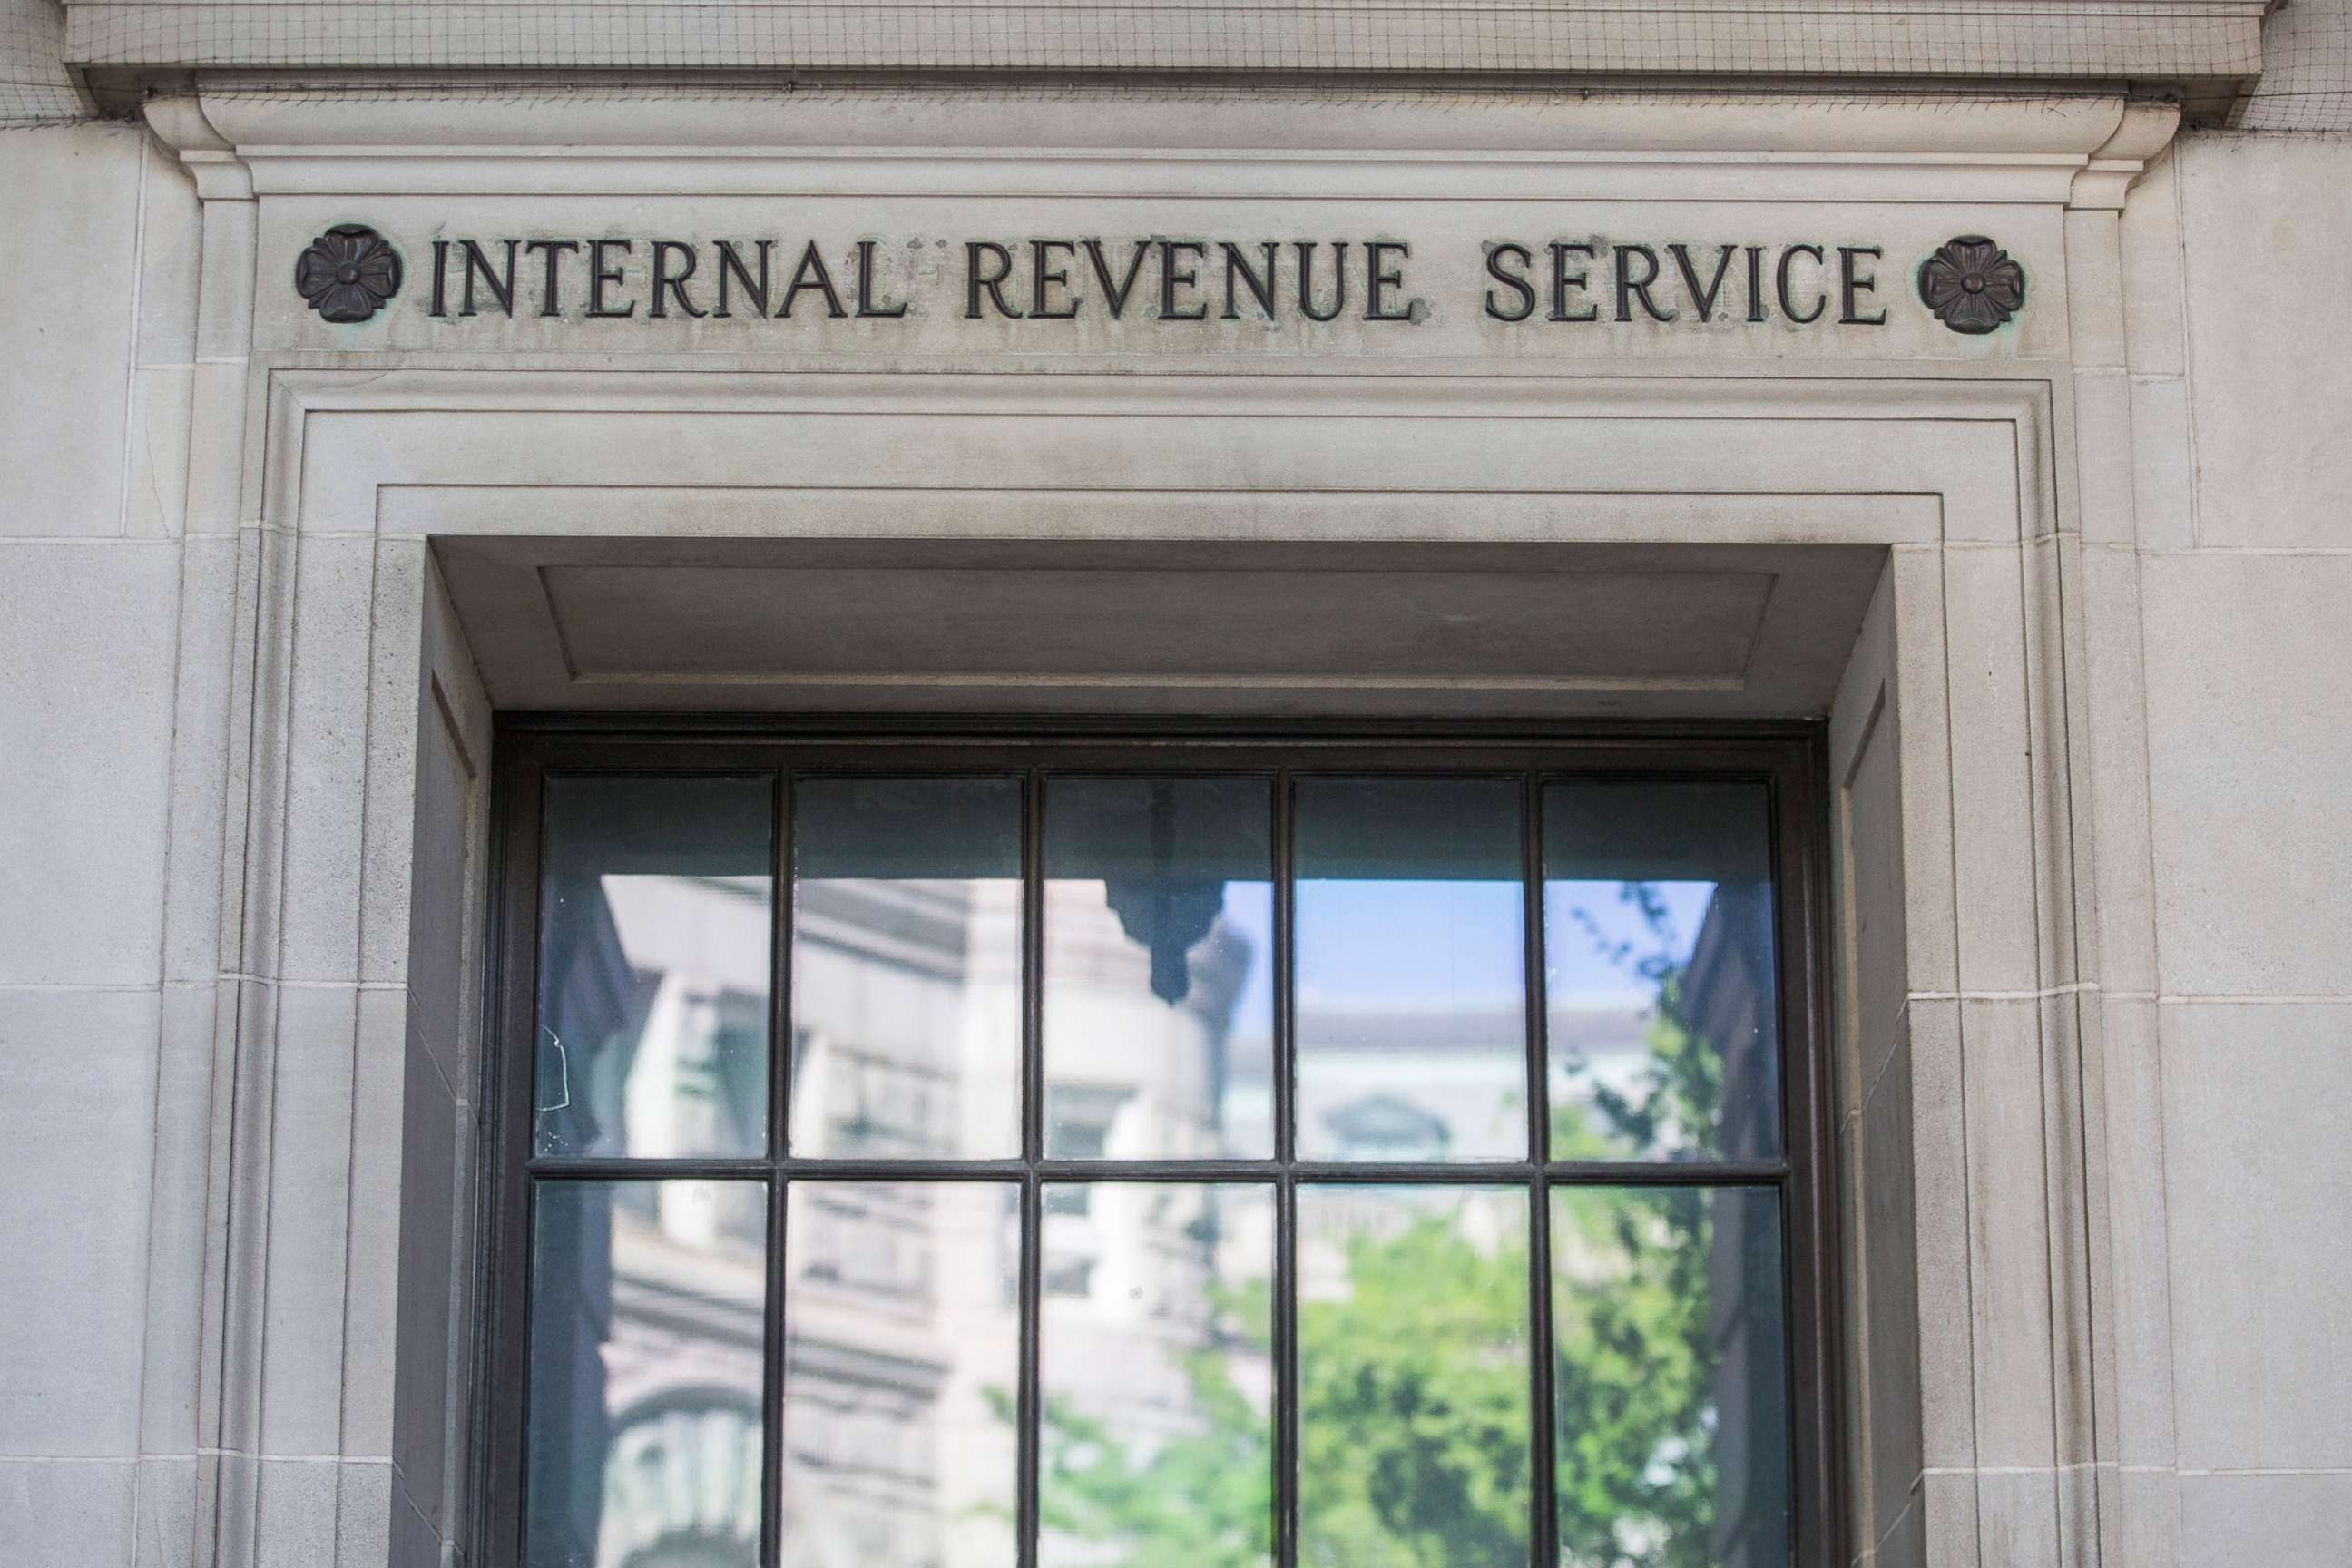 PHOTO: In this April 15, 2019, file photo, the Internal Revenue Service (IRS) building is shown in Washington, D.C.